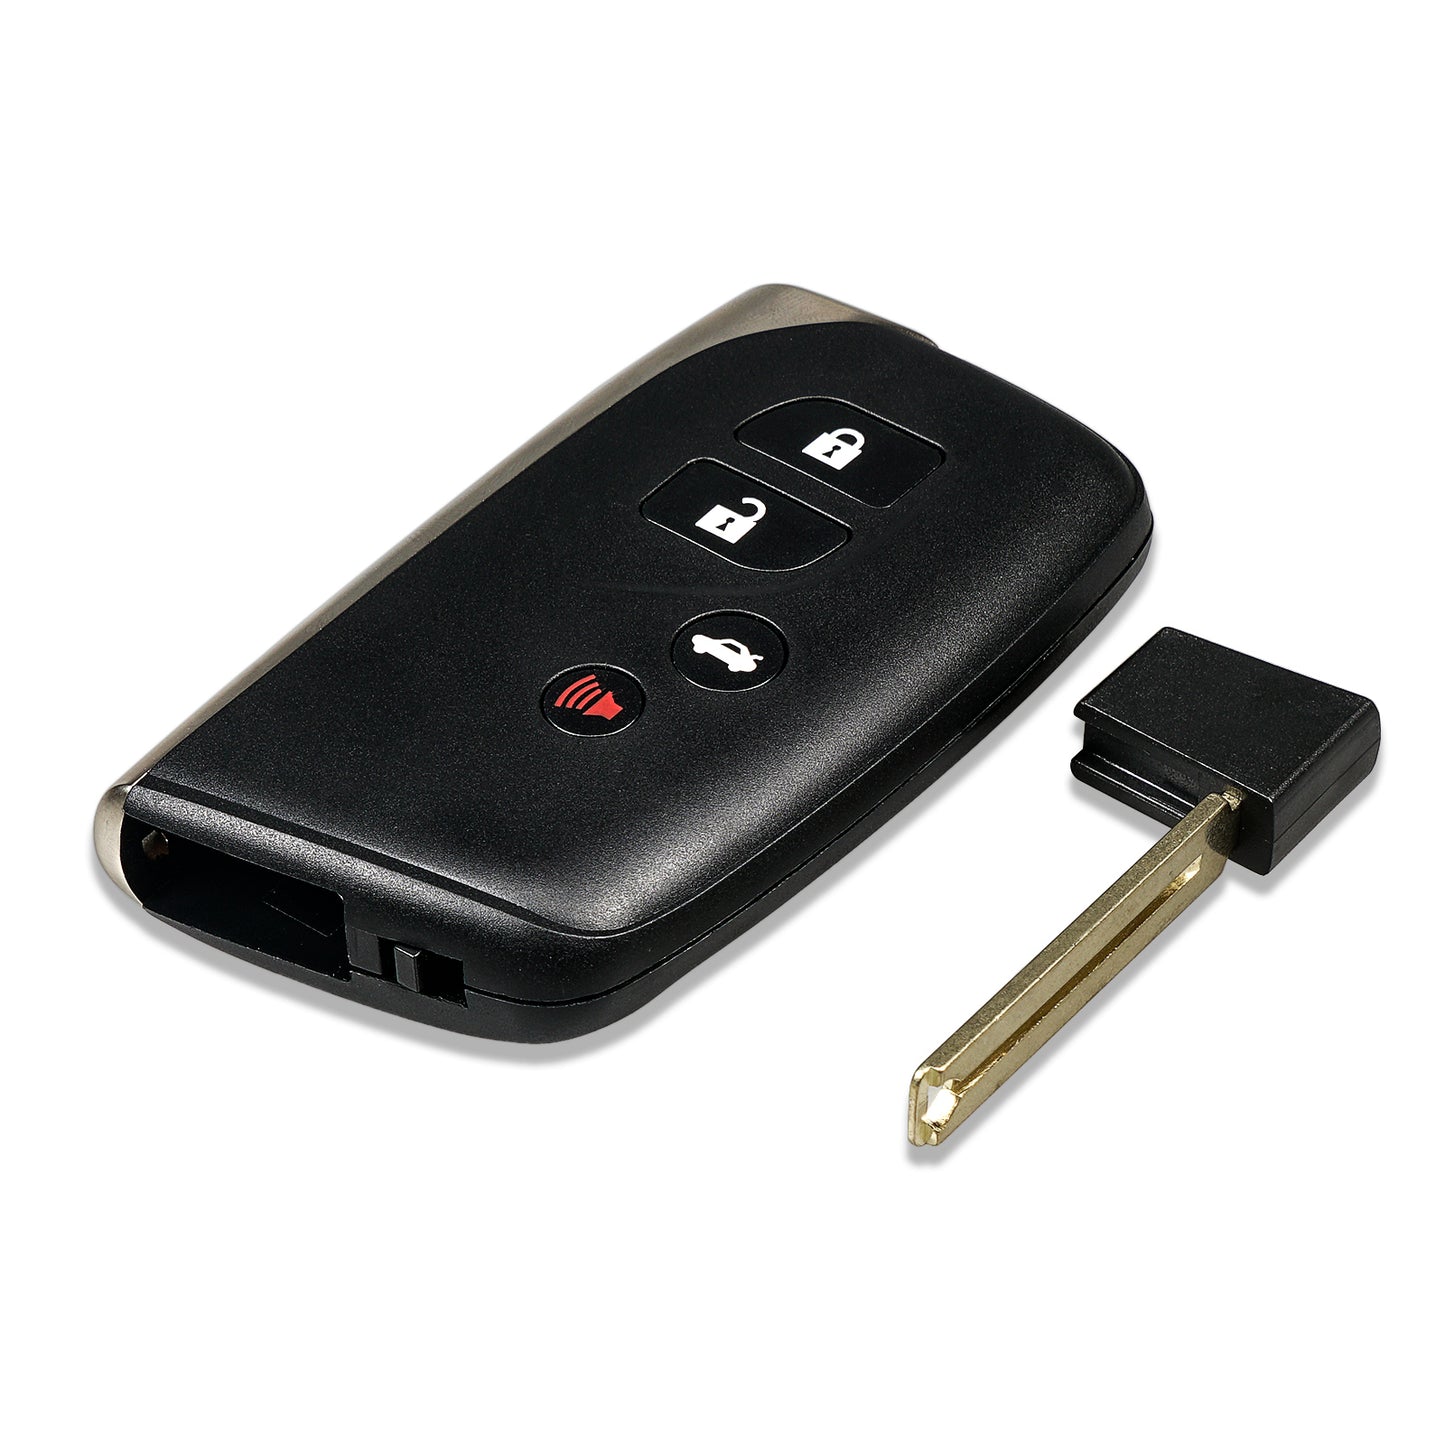 4 Buttons 314.3MHz Keyless Entry Fob Remote Car Key For 2013-2017 LS460 600h FCC ID: HYQ14ACX-5290 SKU : J682